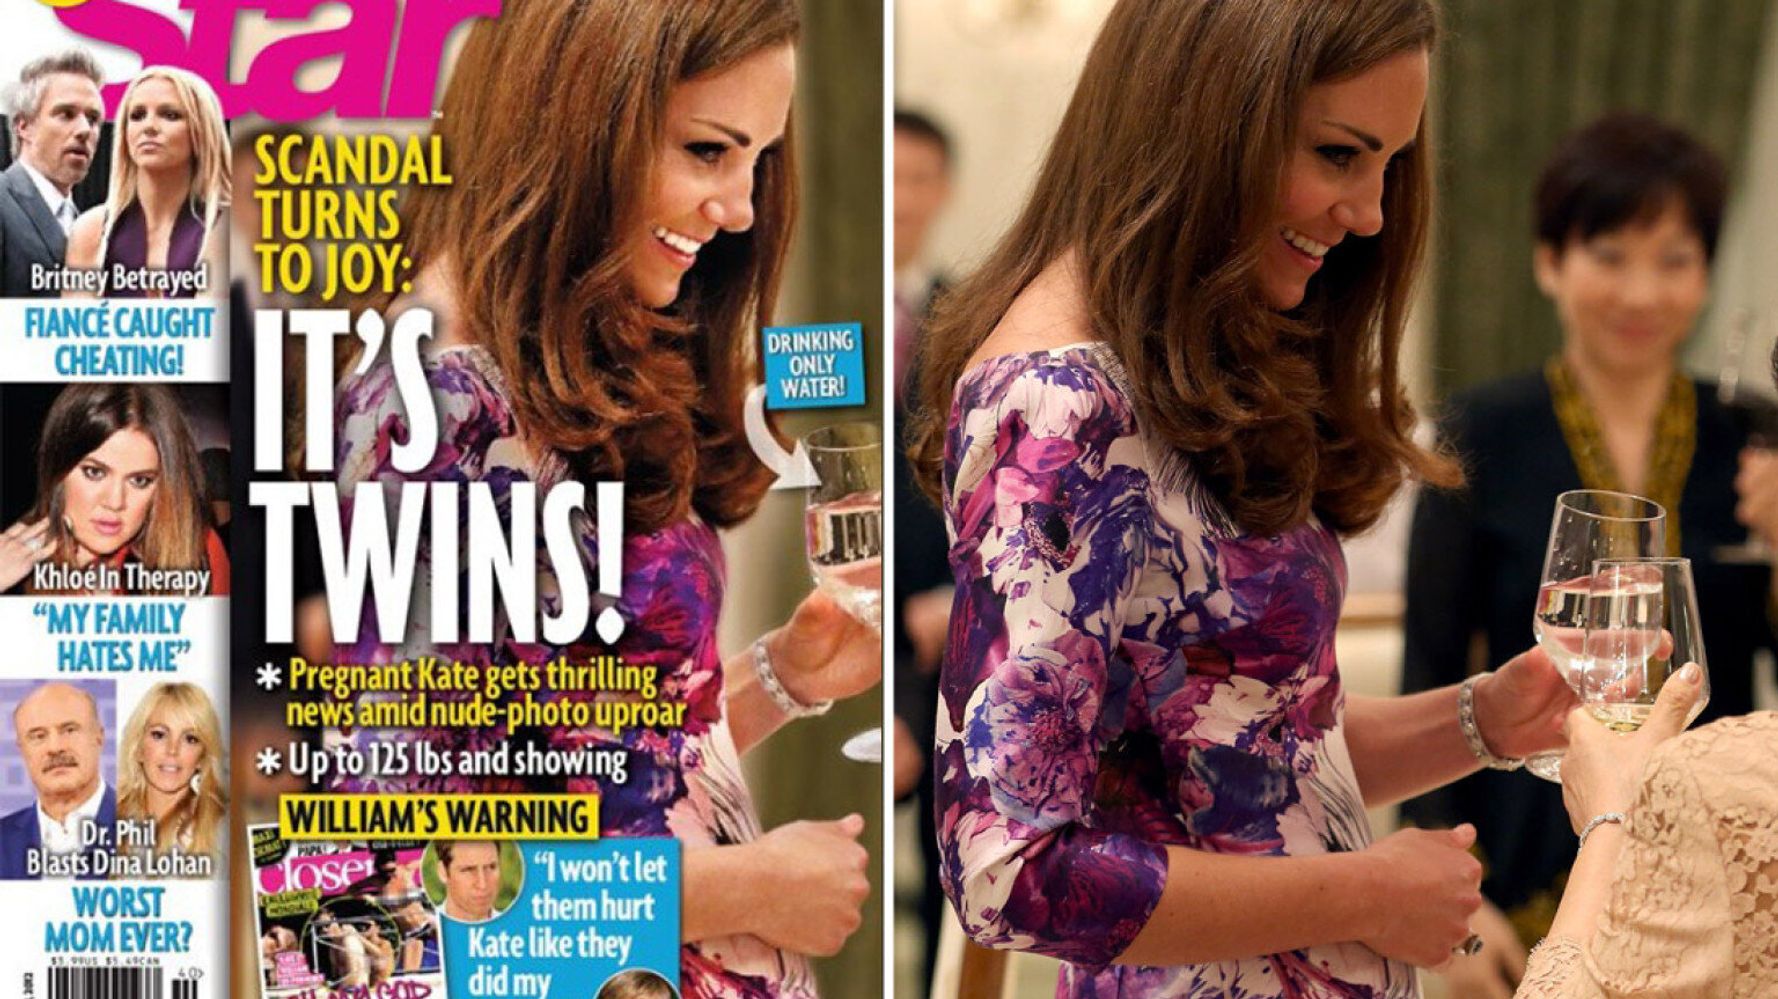 Kate Middleton Topless, Bottomless And Now With Twins'...Except It's Just (PICTURES) | HuffPost UK News